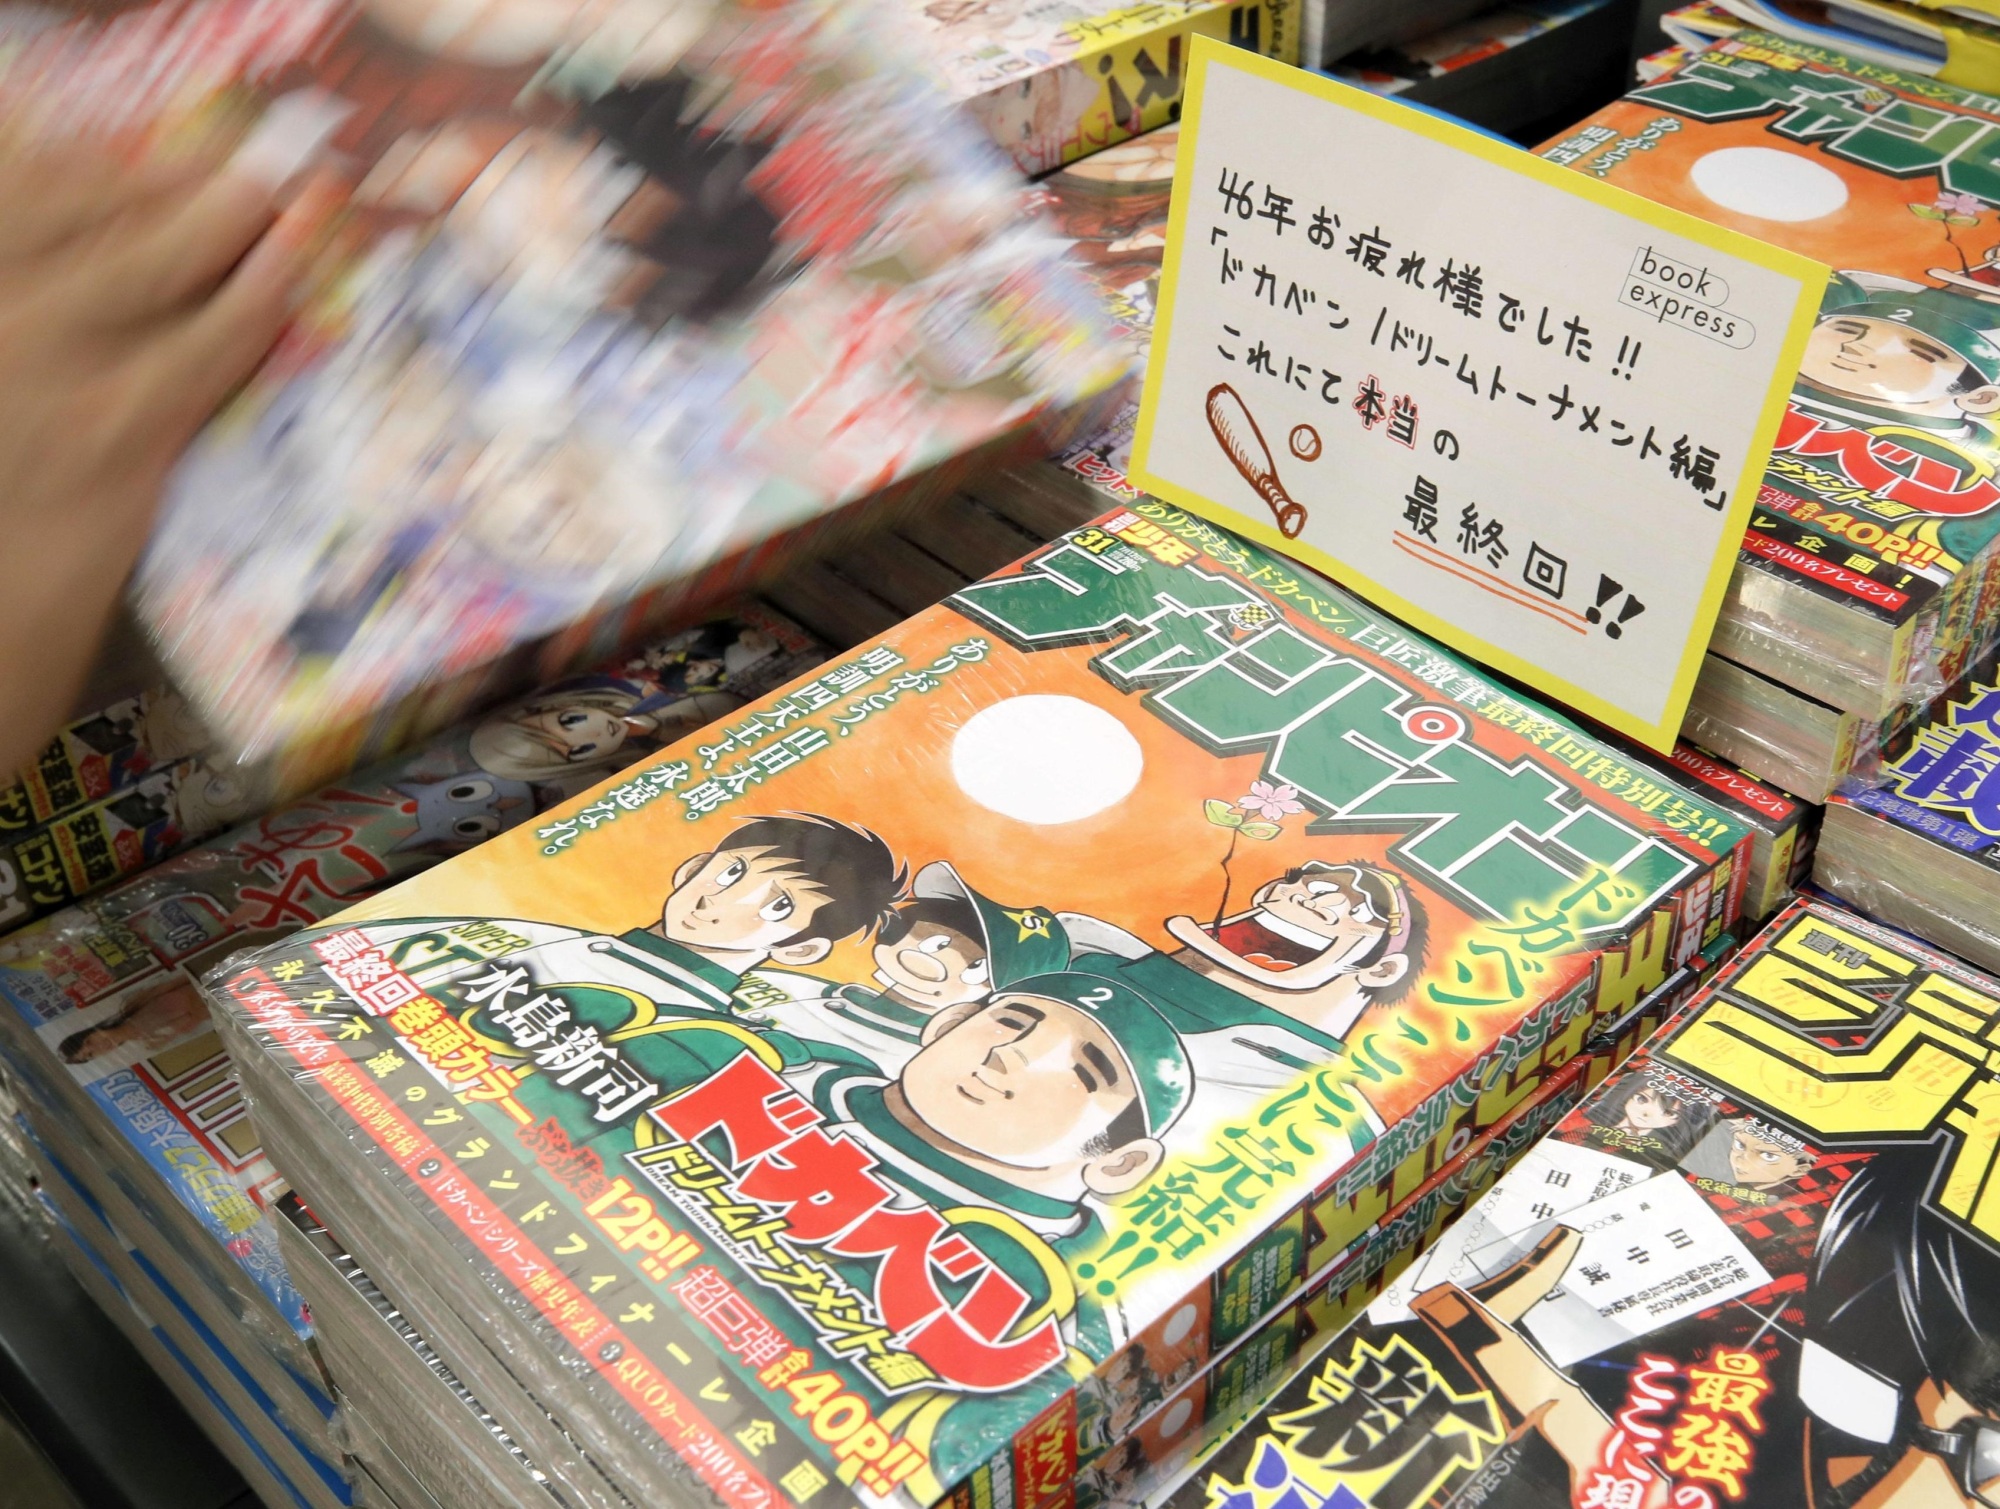 Dokaben' baseball manga series concludes after 46-year run | The Times